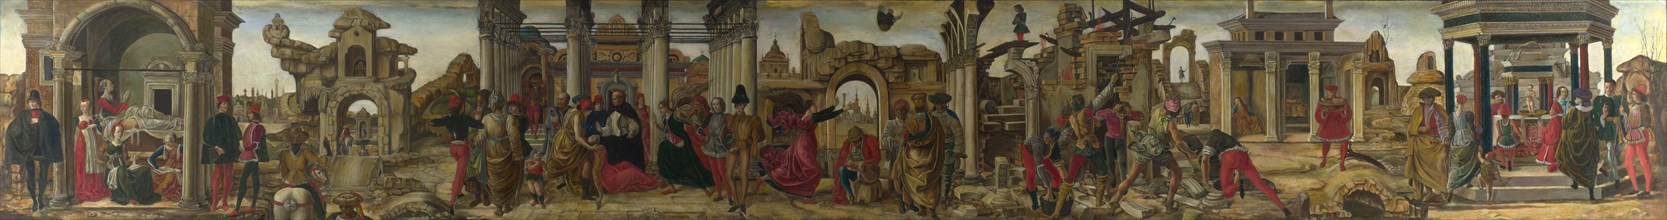 Scenes from the Life of Saint Vincent Ferrer , ca 1450-1475. Found in the collection of National Gallery, London.